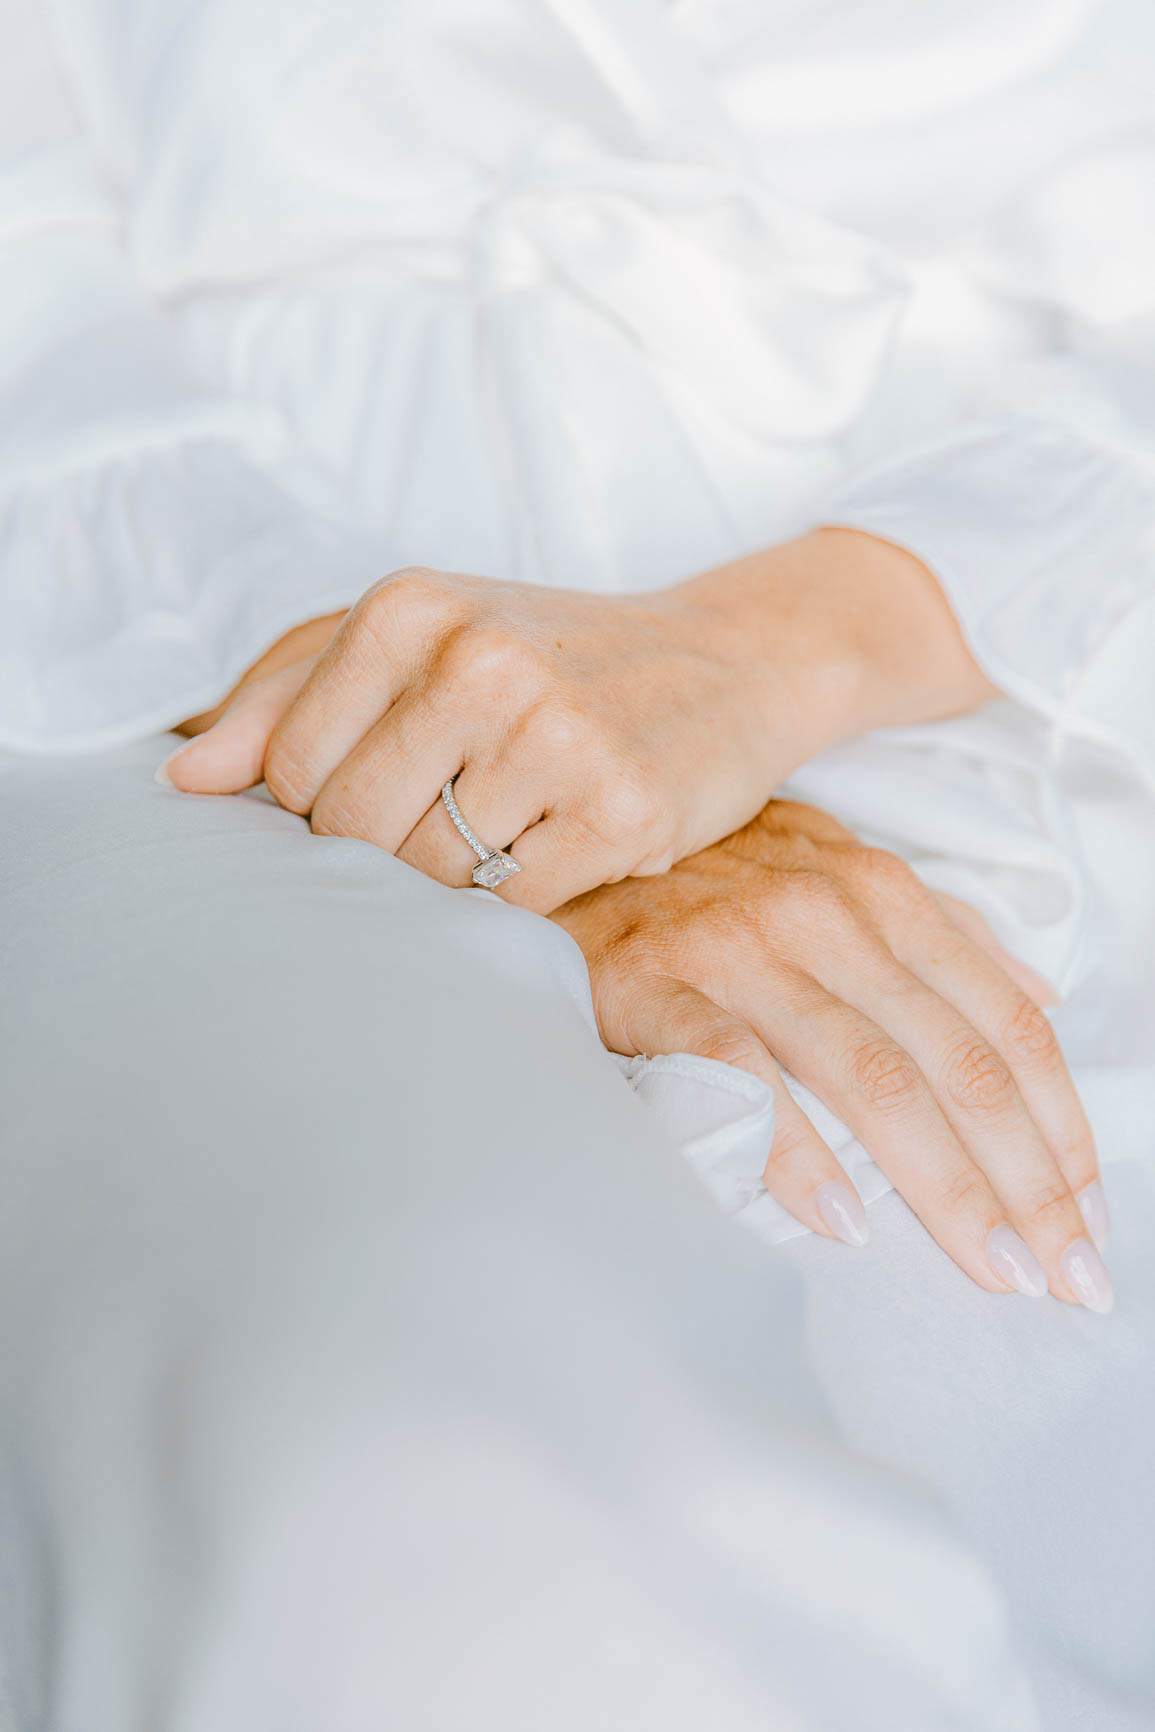 Bride in white robe wearing an emerald engagement ring shot by Nhieu Tang | nhieutang.com